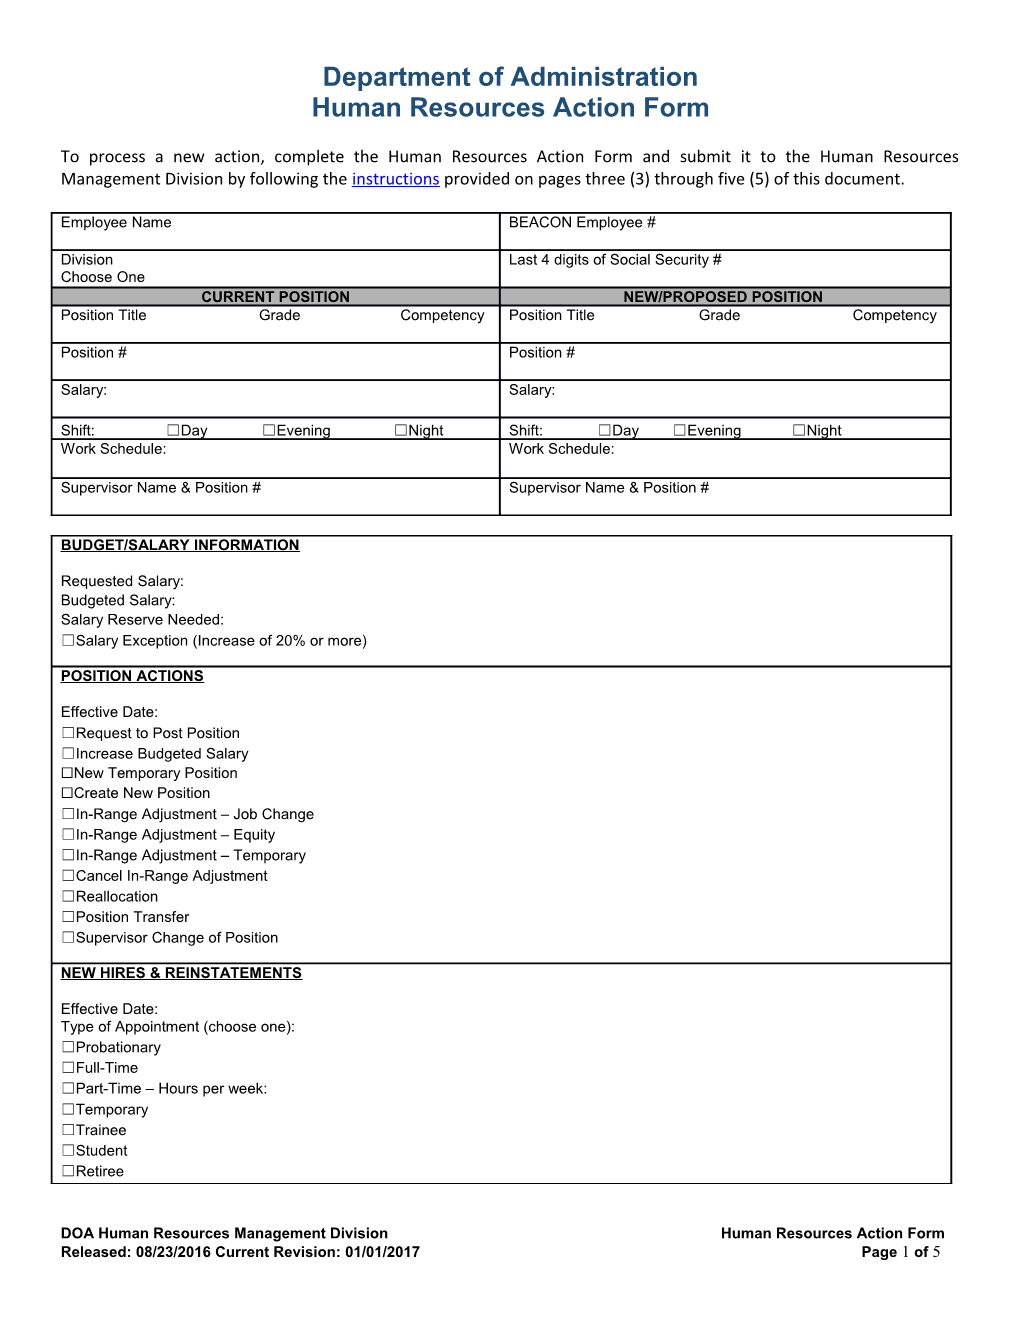 Human Resources Action Form